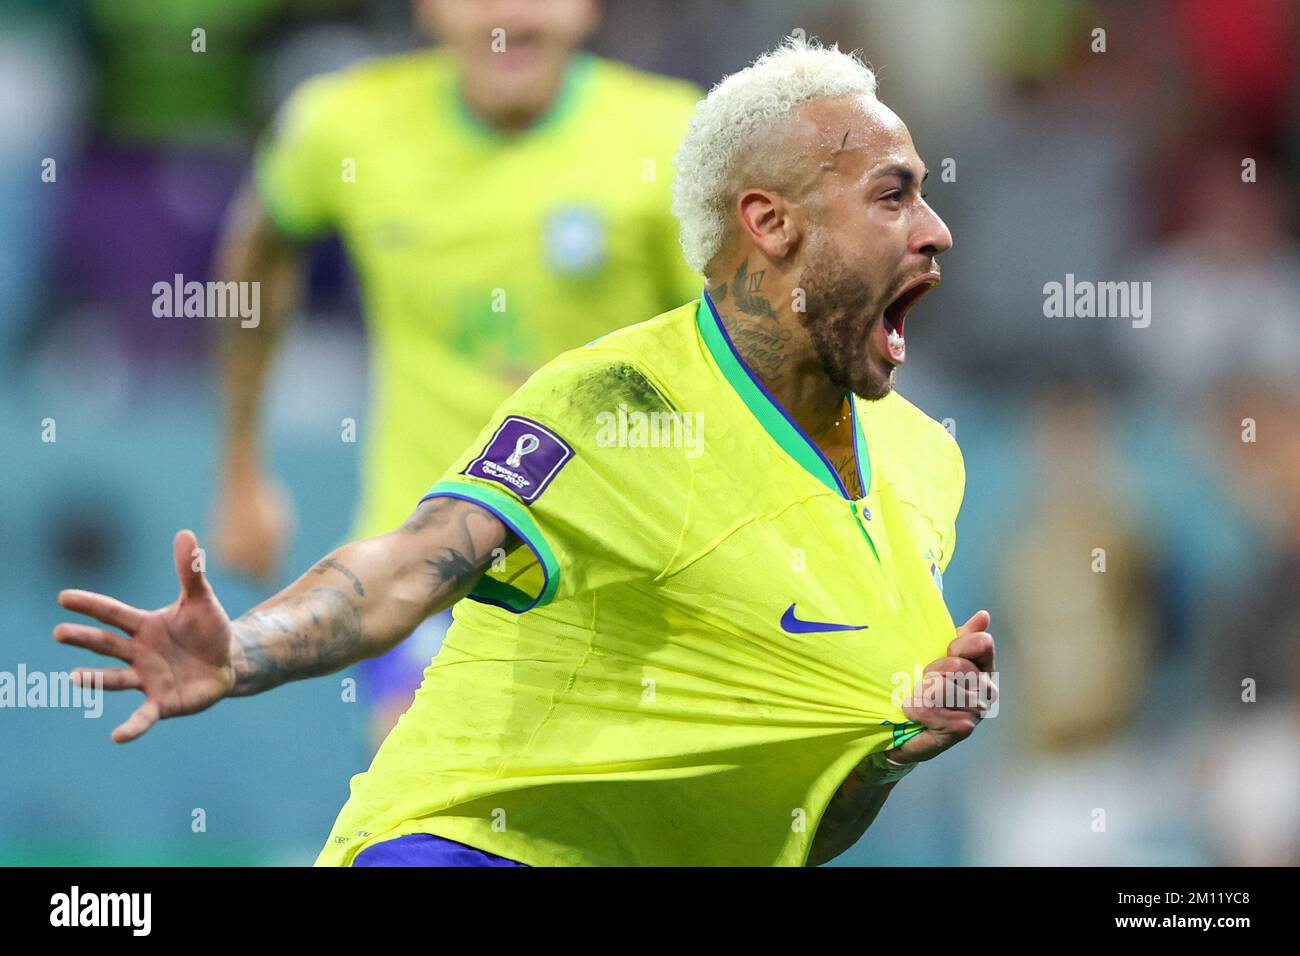 Doha, Qatar. 09th Dec, 2022. Neymar Player of Brazil celebrates a goal during a match against Croatia valid for the quarterfinals of the FIFA World Cup in Qatar at Education City Stadium in Doha, Qatar. December 9, 2022 Photo:William Volcov Credit: Brazil Photo Press/Alamy Live News Stock Photo